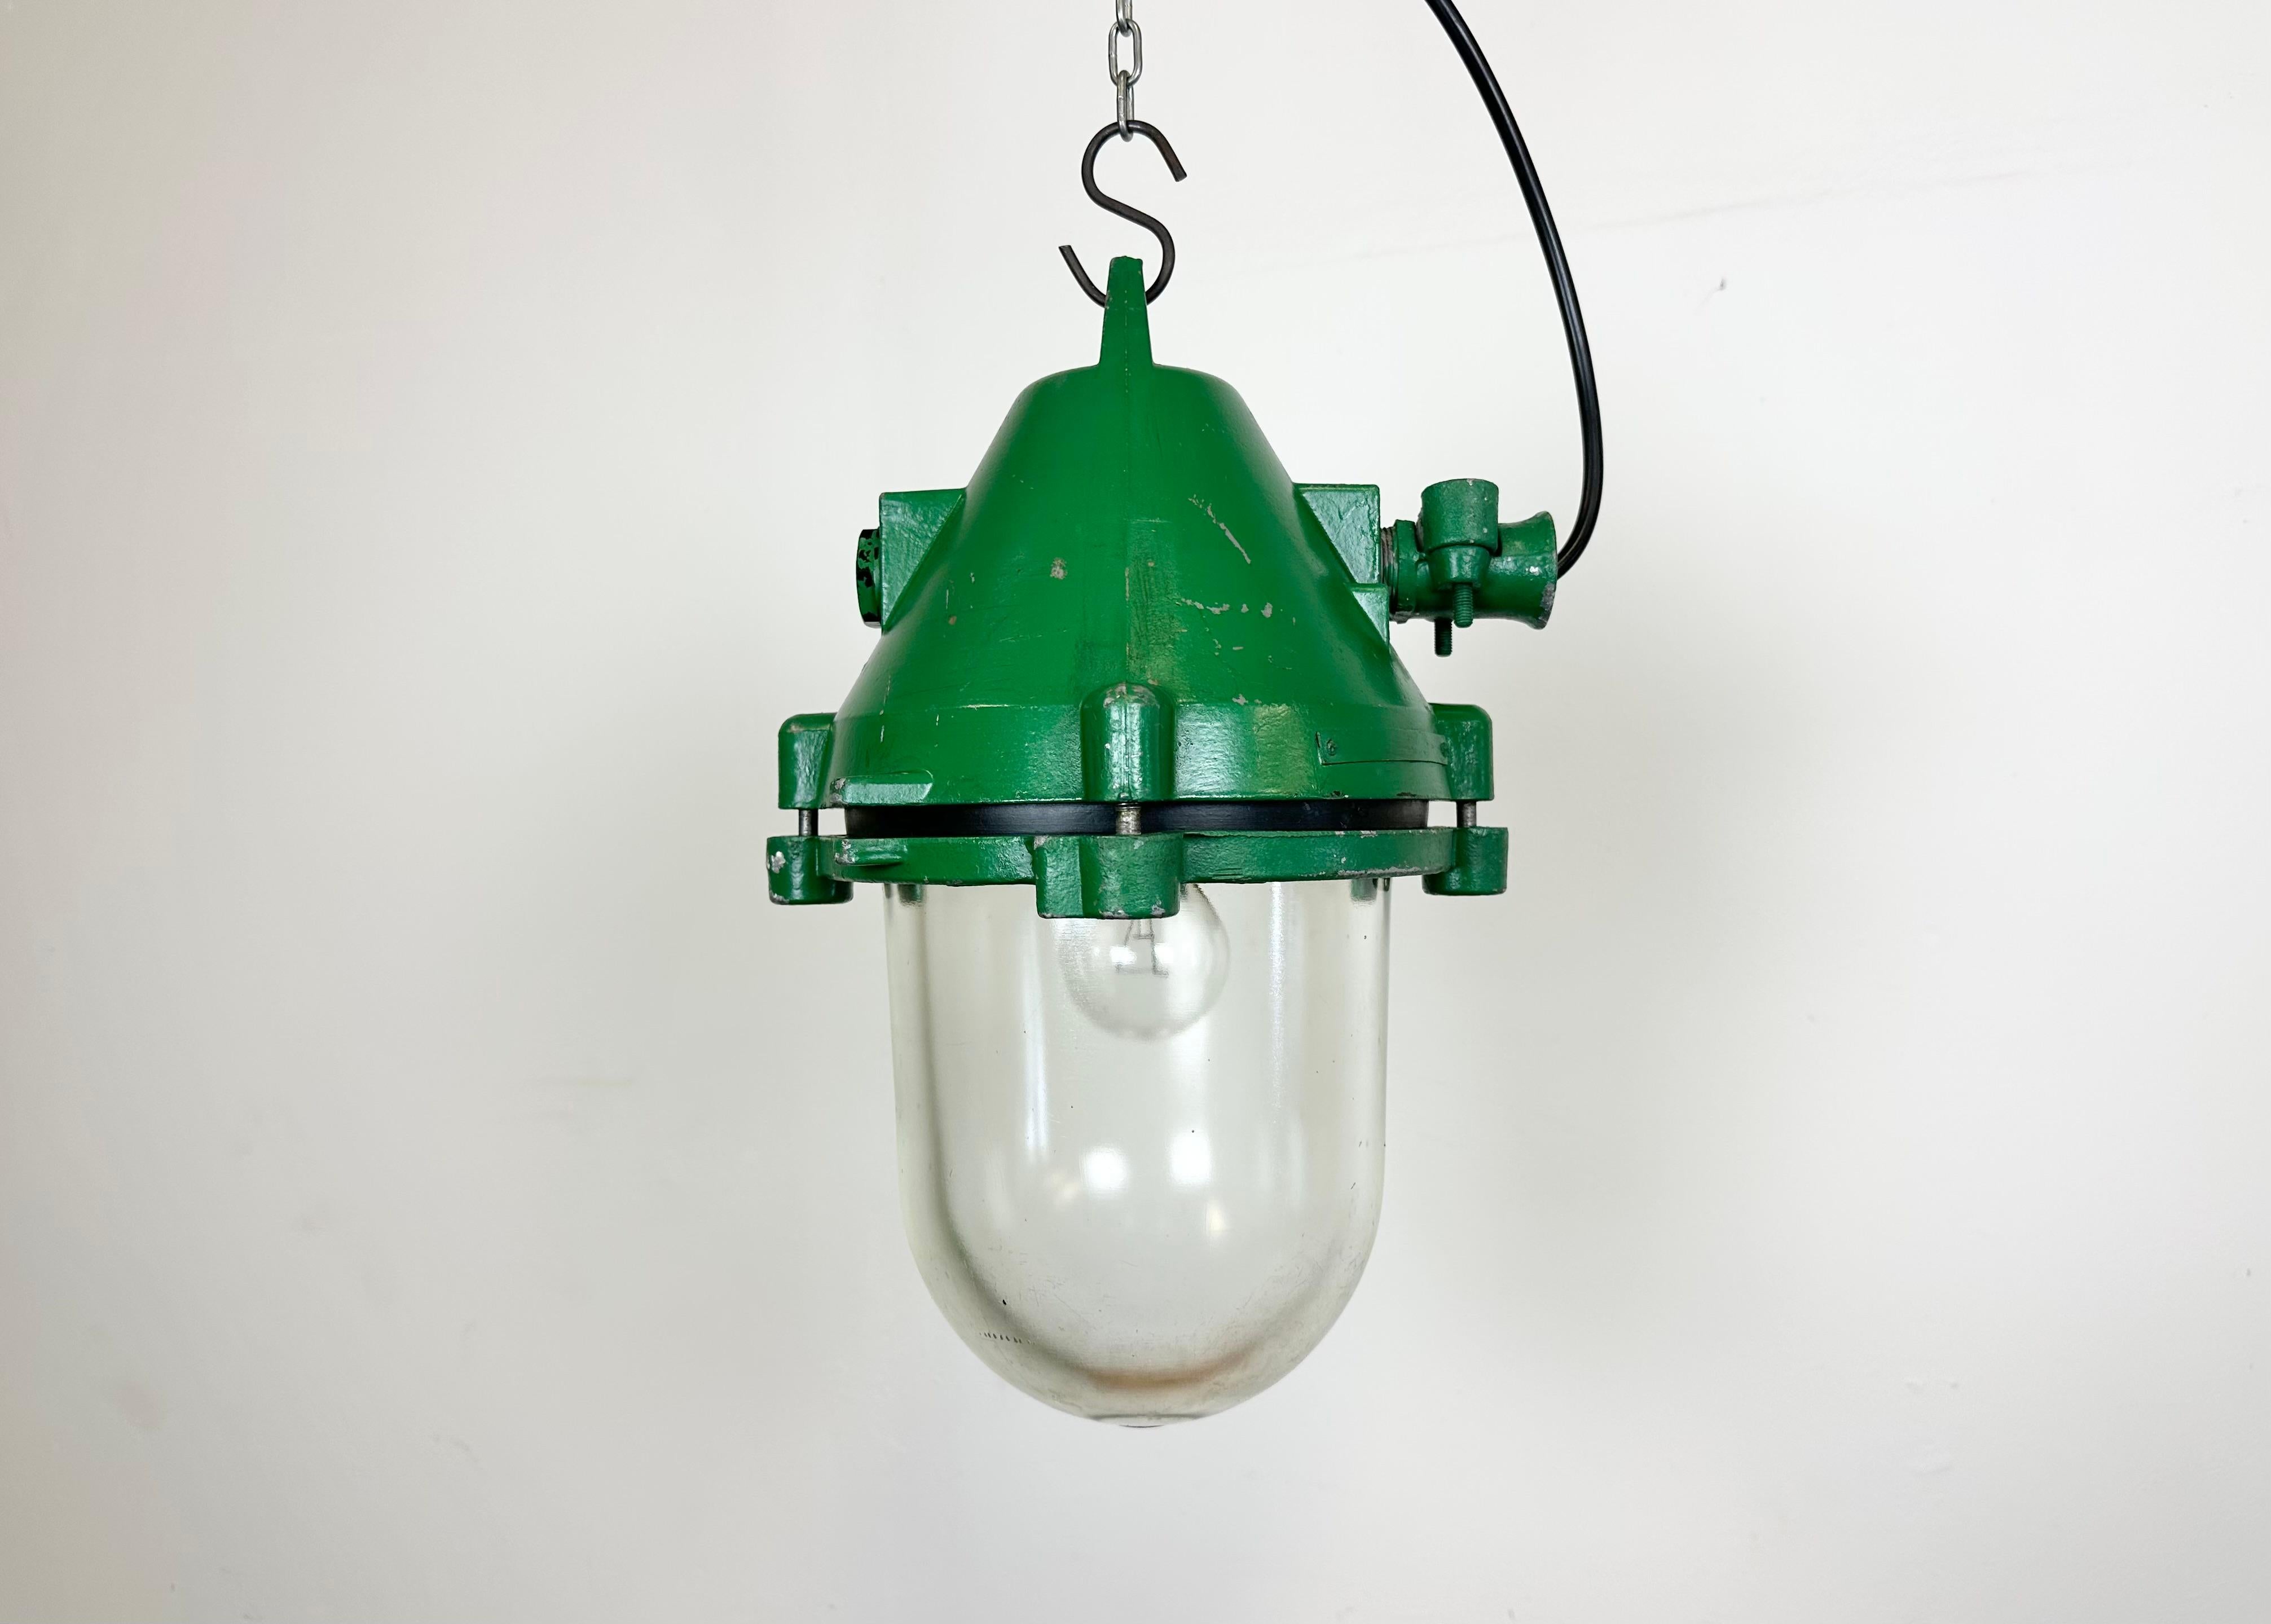 Green industrial explosion proof light with massive protective glass bulb. Made in former Czechoslovakia by Elektrosvit during the 1970s. It features a cast aluminium body and a clear glass cover. The original porcelain socket requires standard E27/